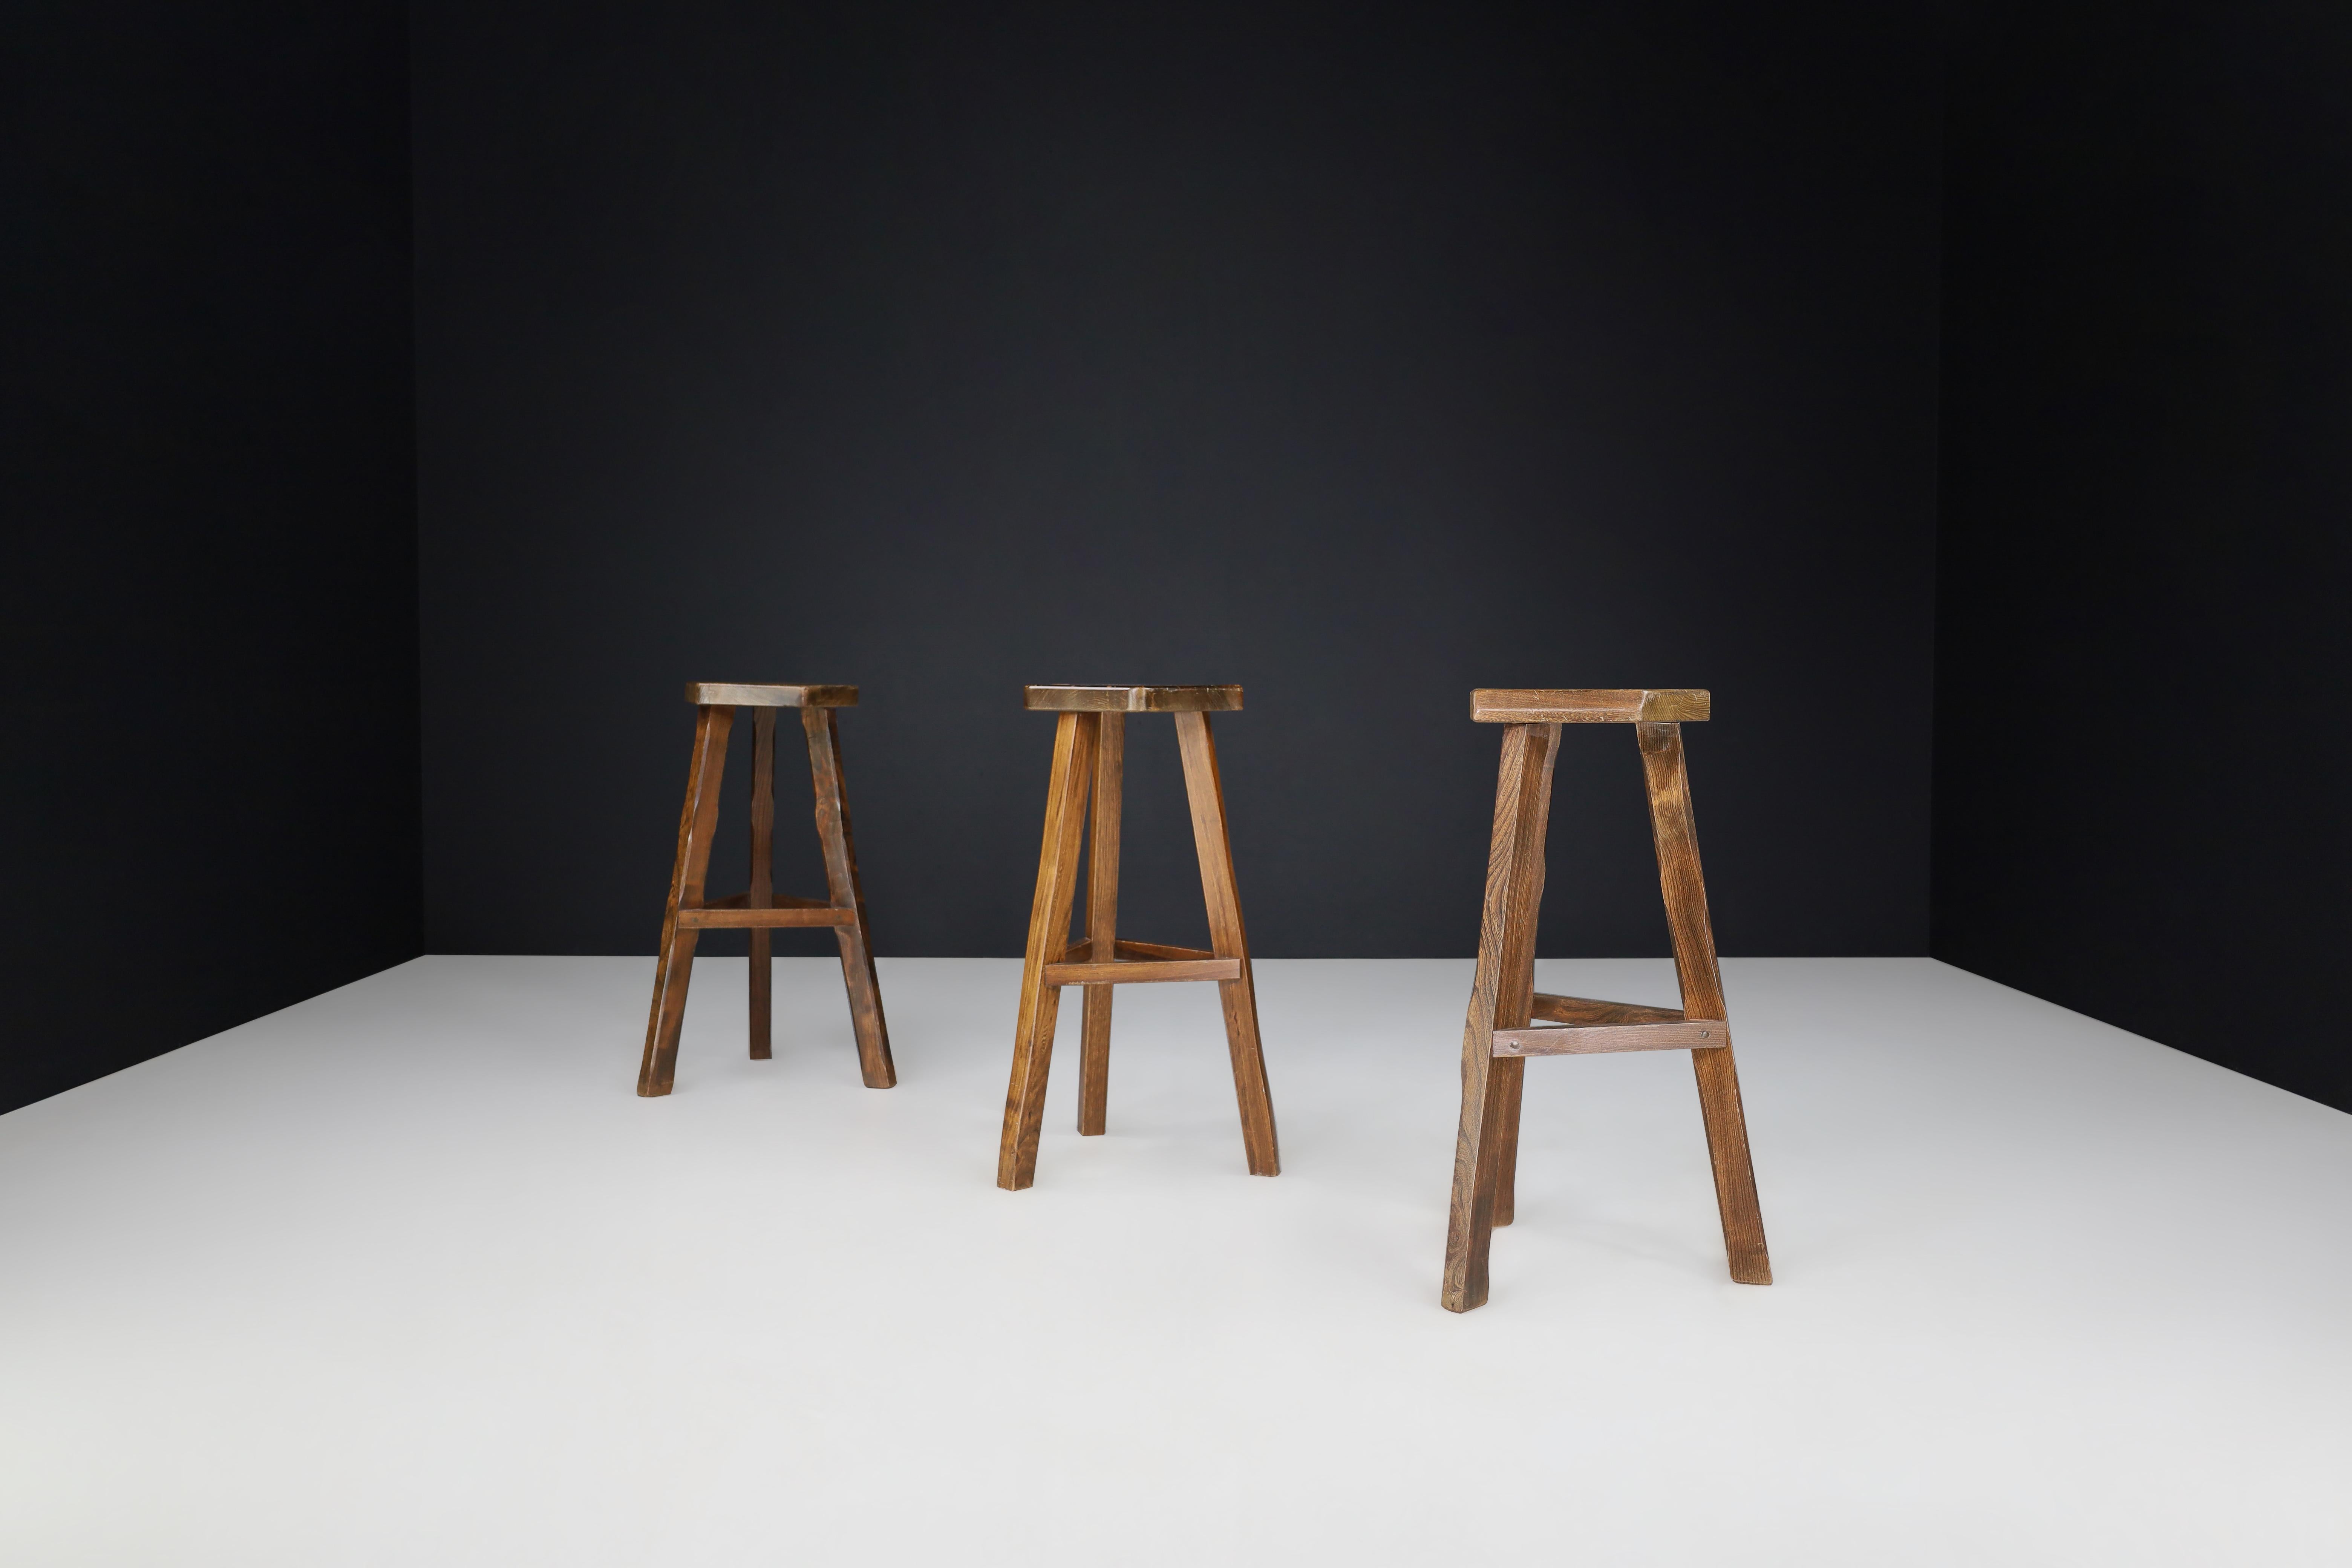 Olavi Hänninen Brutalist Elm Wood Bar Stools, Finland 1960s 

These set of 3 bar stools, crafted by Finnish designer Olavi Hänninen in the 1960s, boast unique warm tones due to their dark stained Elm wood construction. Hand-carved with precision,